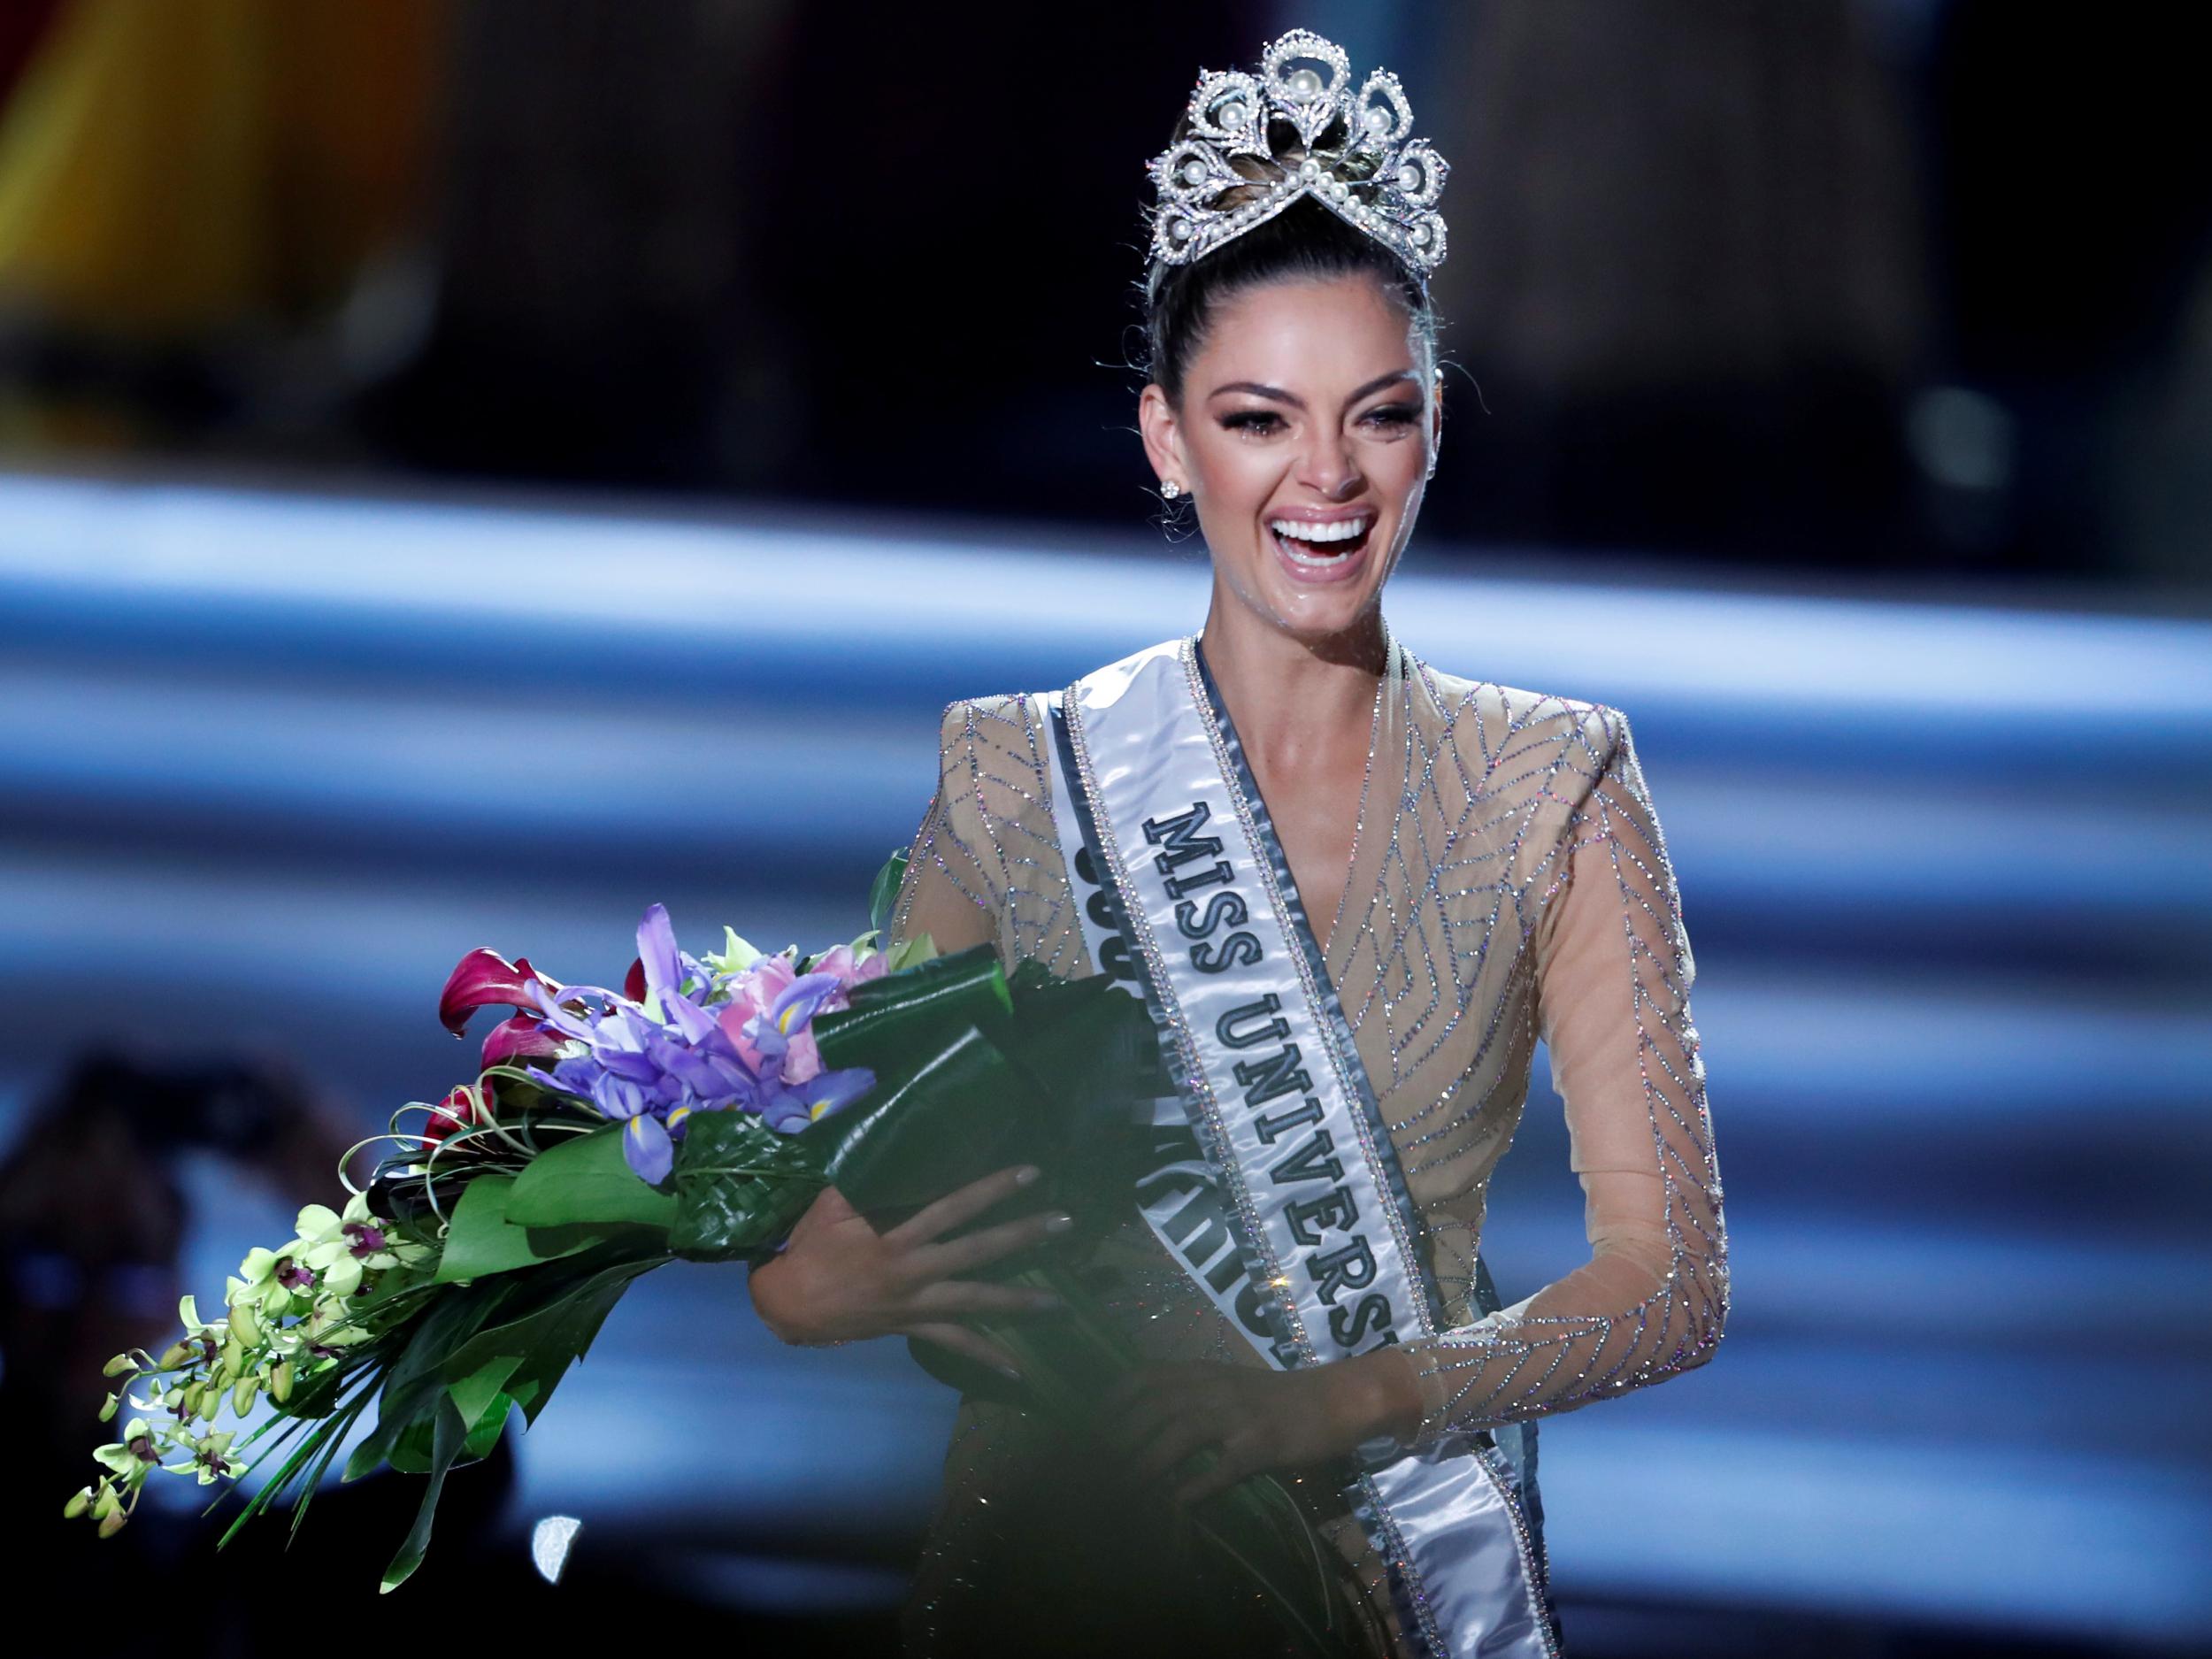 Miss South Africa Demi Leigh Nel Peters Is Crowned Miss Universe 2017